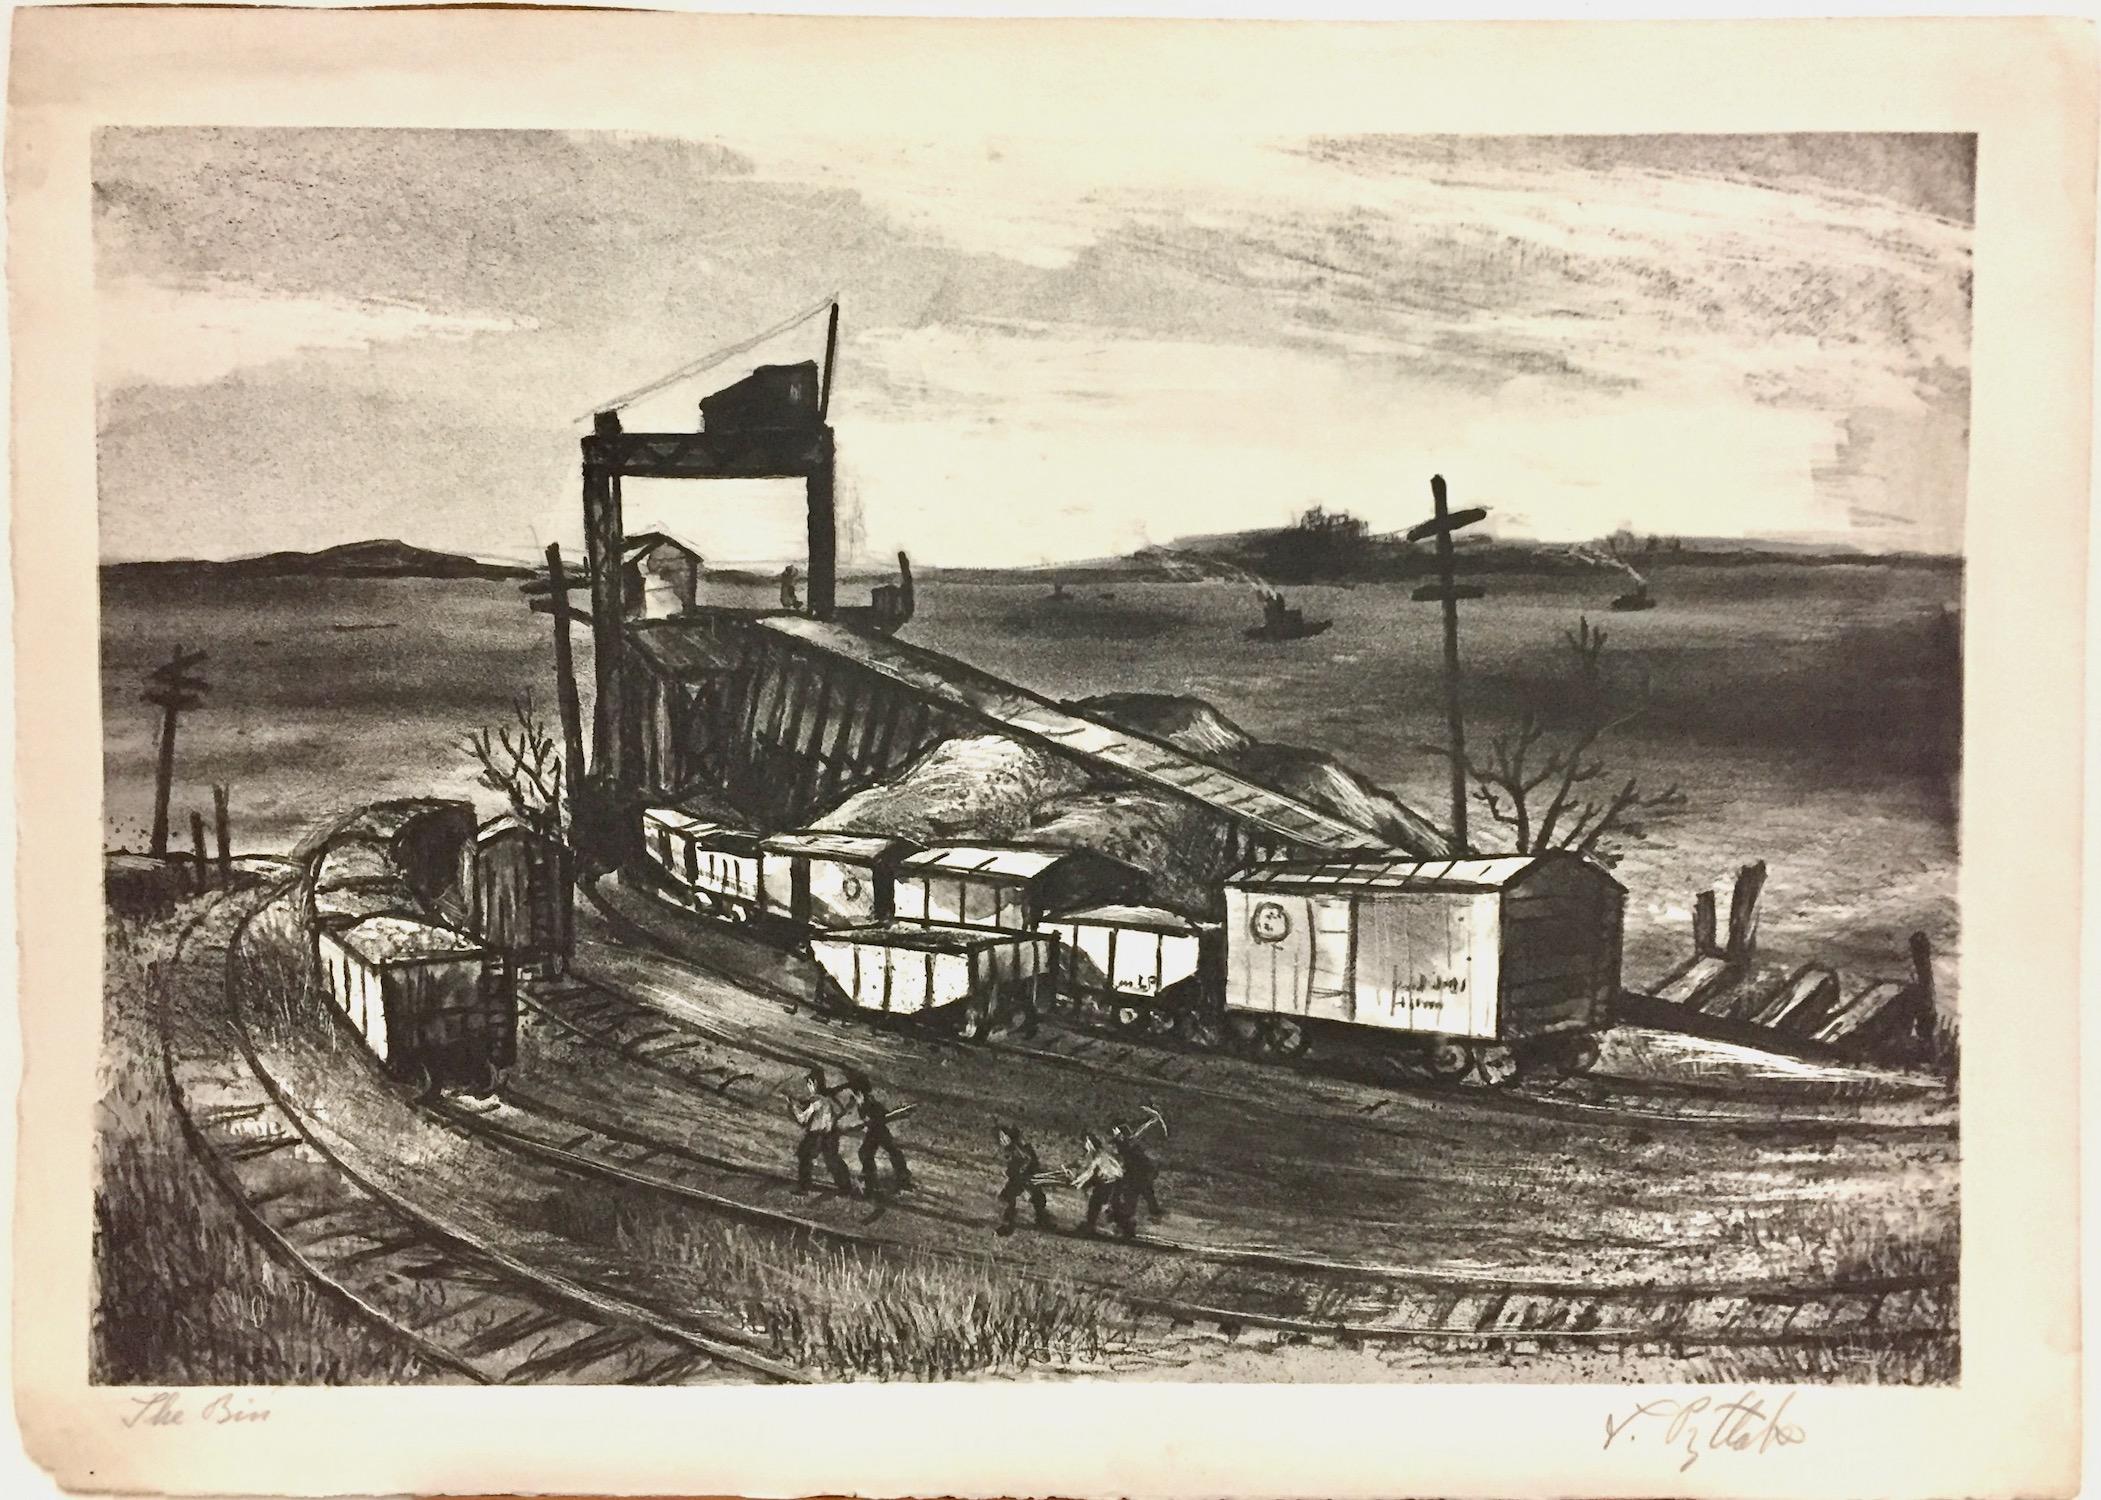 This lithograph is signed and titled in pencil.

